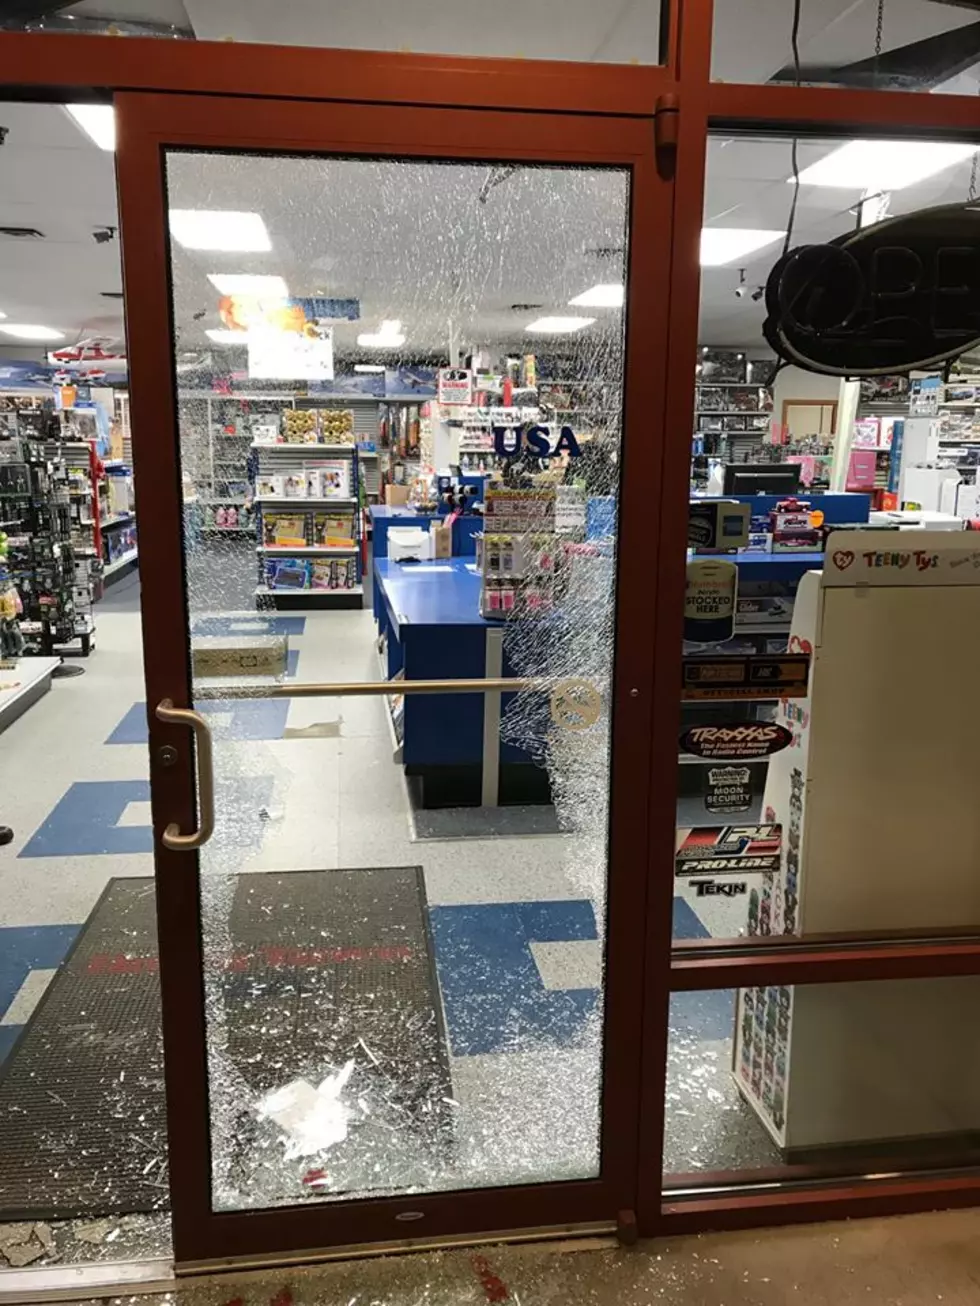 Popular Store Finds Smashed Glass Everywhere and Money Missing